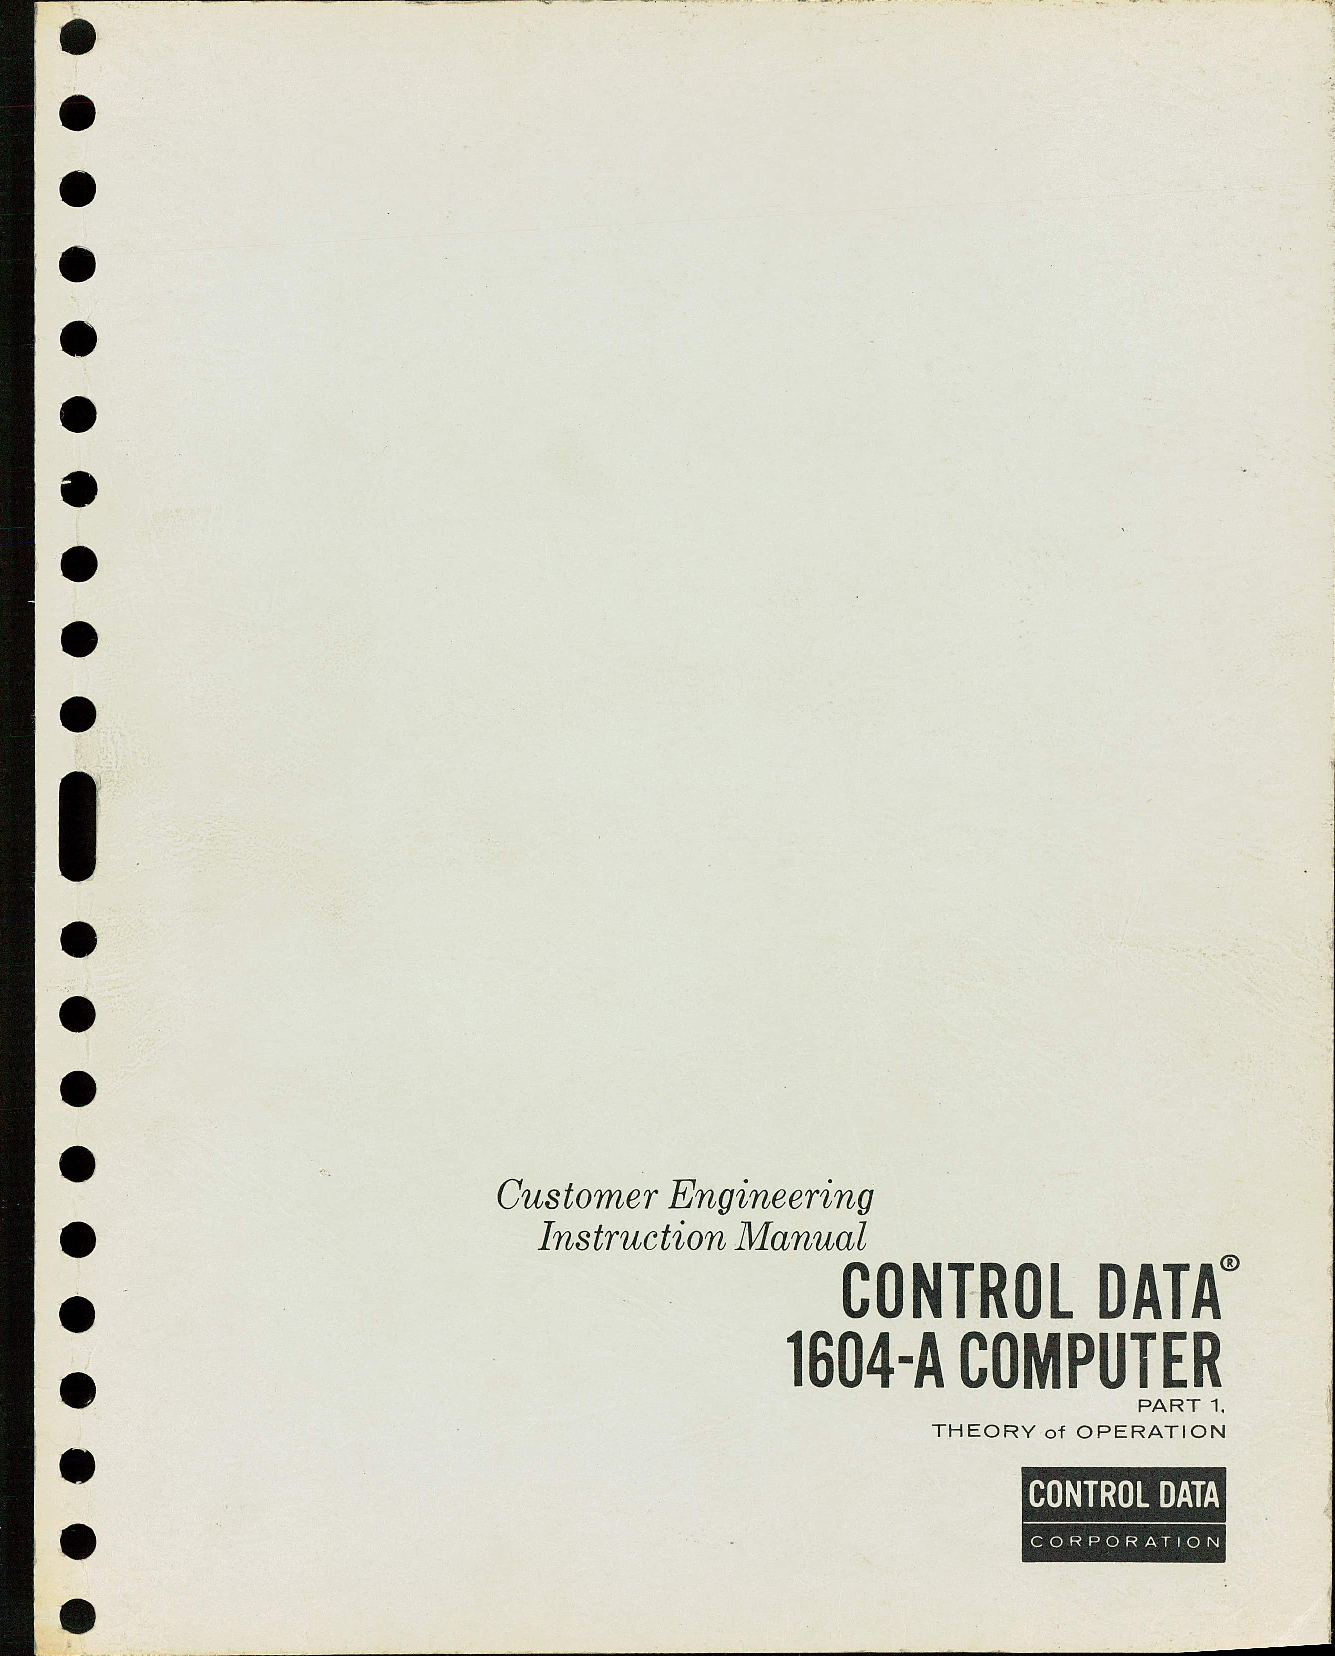 60118700A_CDC_1604A_Customer_Engineering_Instruction_Manual_Sep1966 .